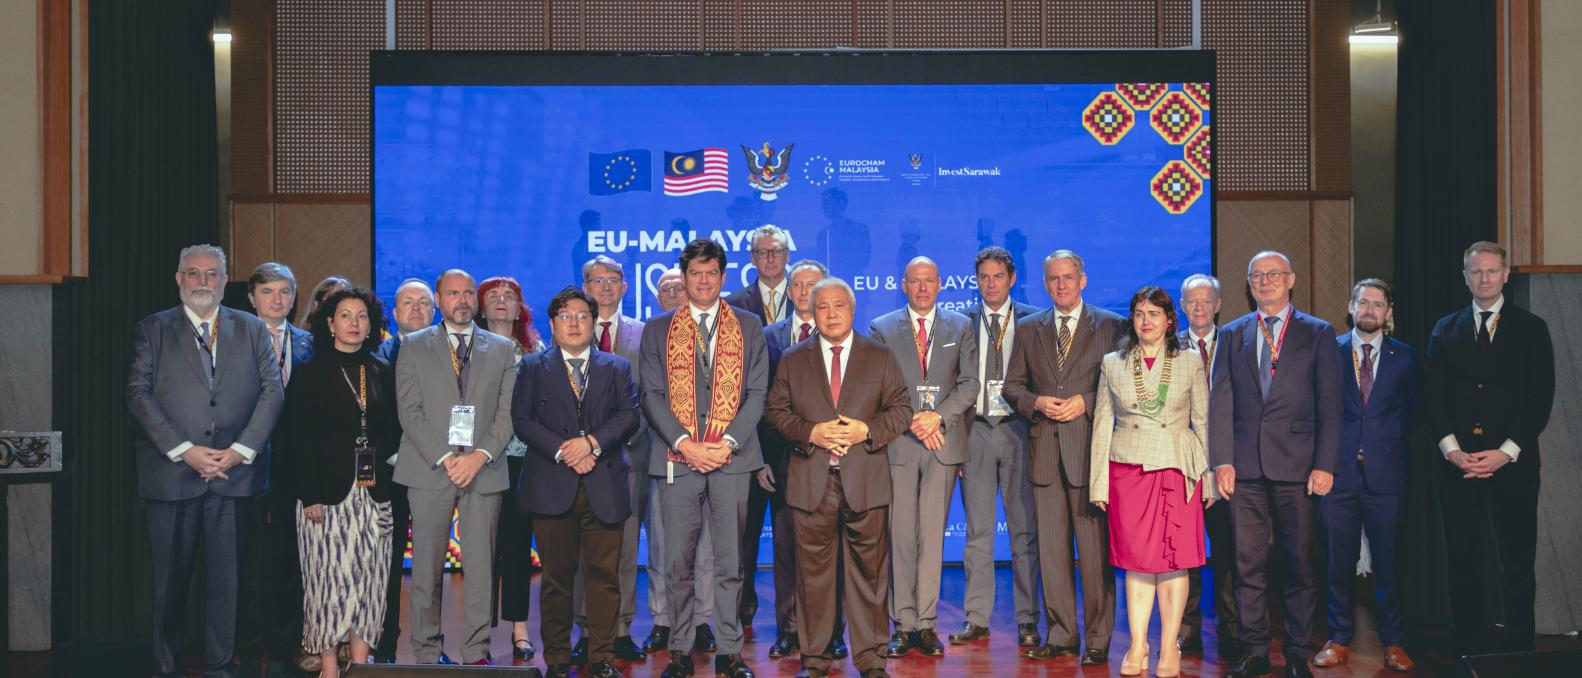 17 EU Ambassadors and DPM of Sarawak on stage during the Business Day